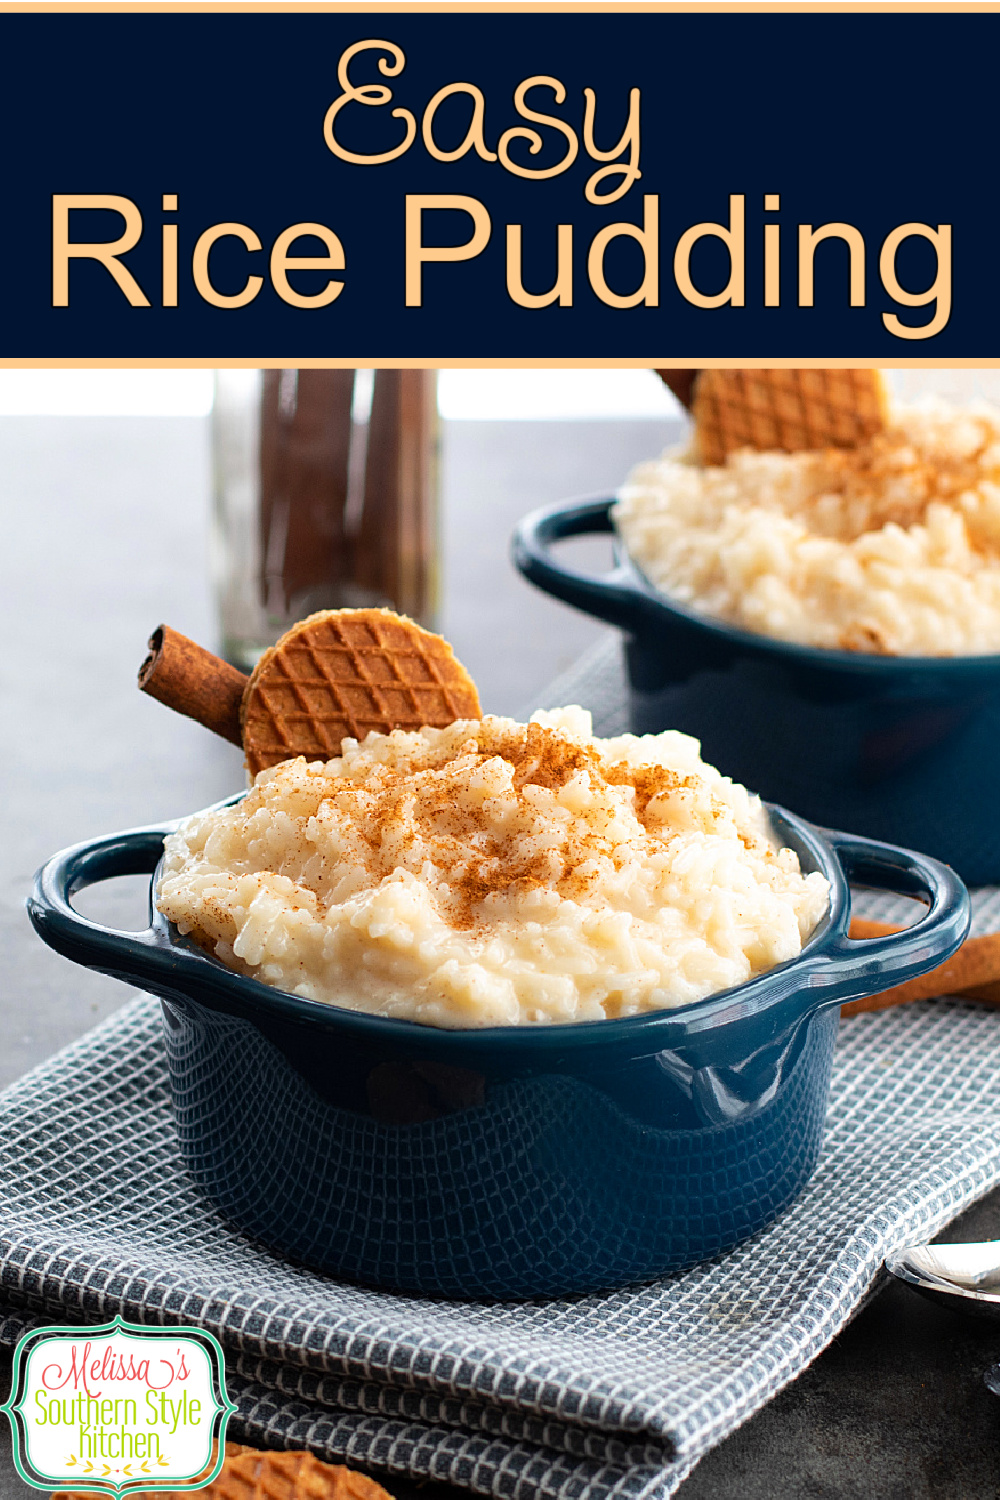 Make this Easy Rice Pudding with a surprise ingredient in no time flat! #ricepudding #easyricepudding #bestricepuddingrecipes #vanillaicecream #desserts #southernstylericepudding via @melissasssk